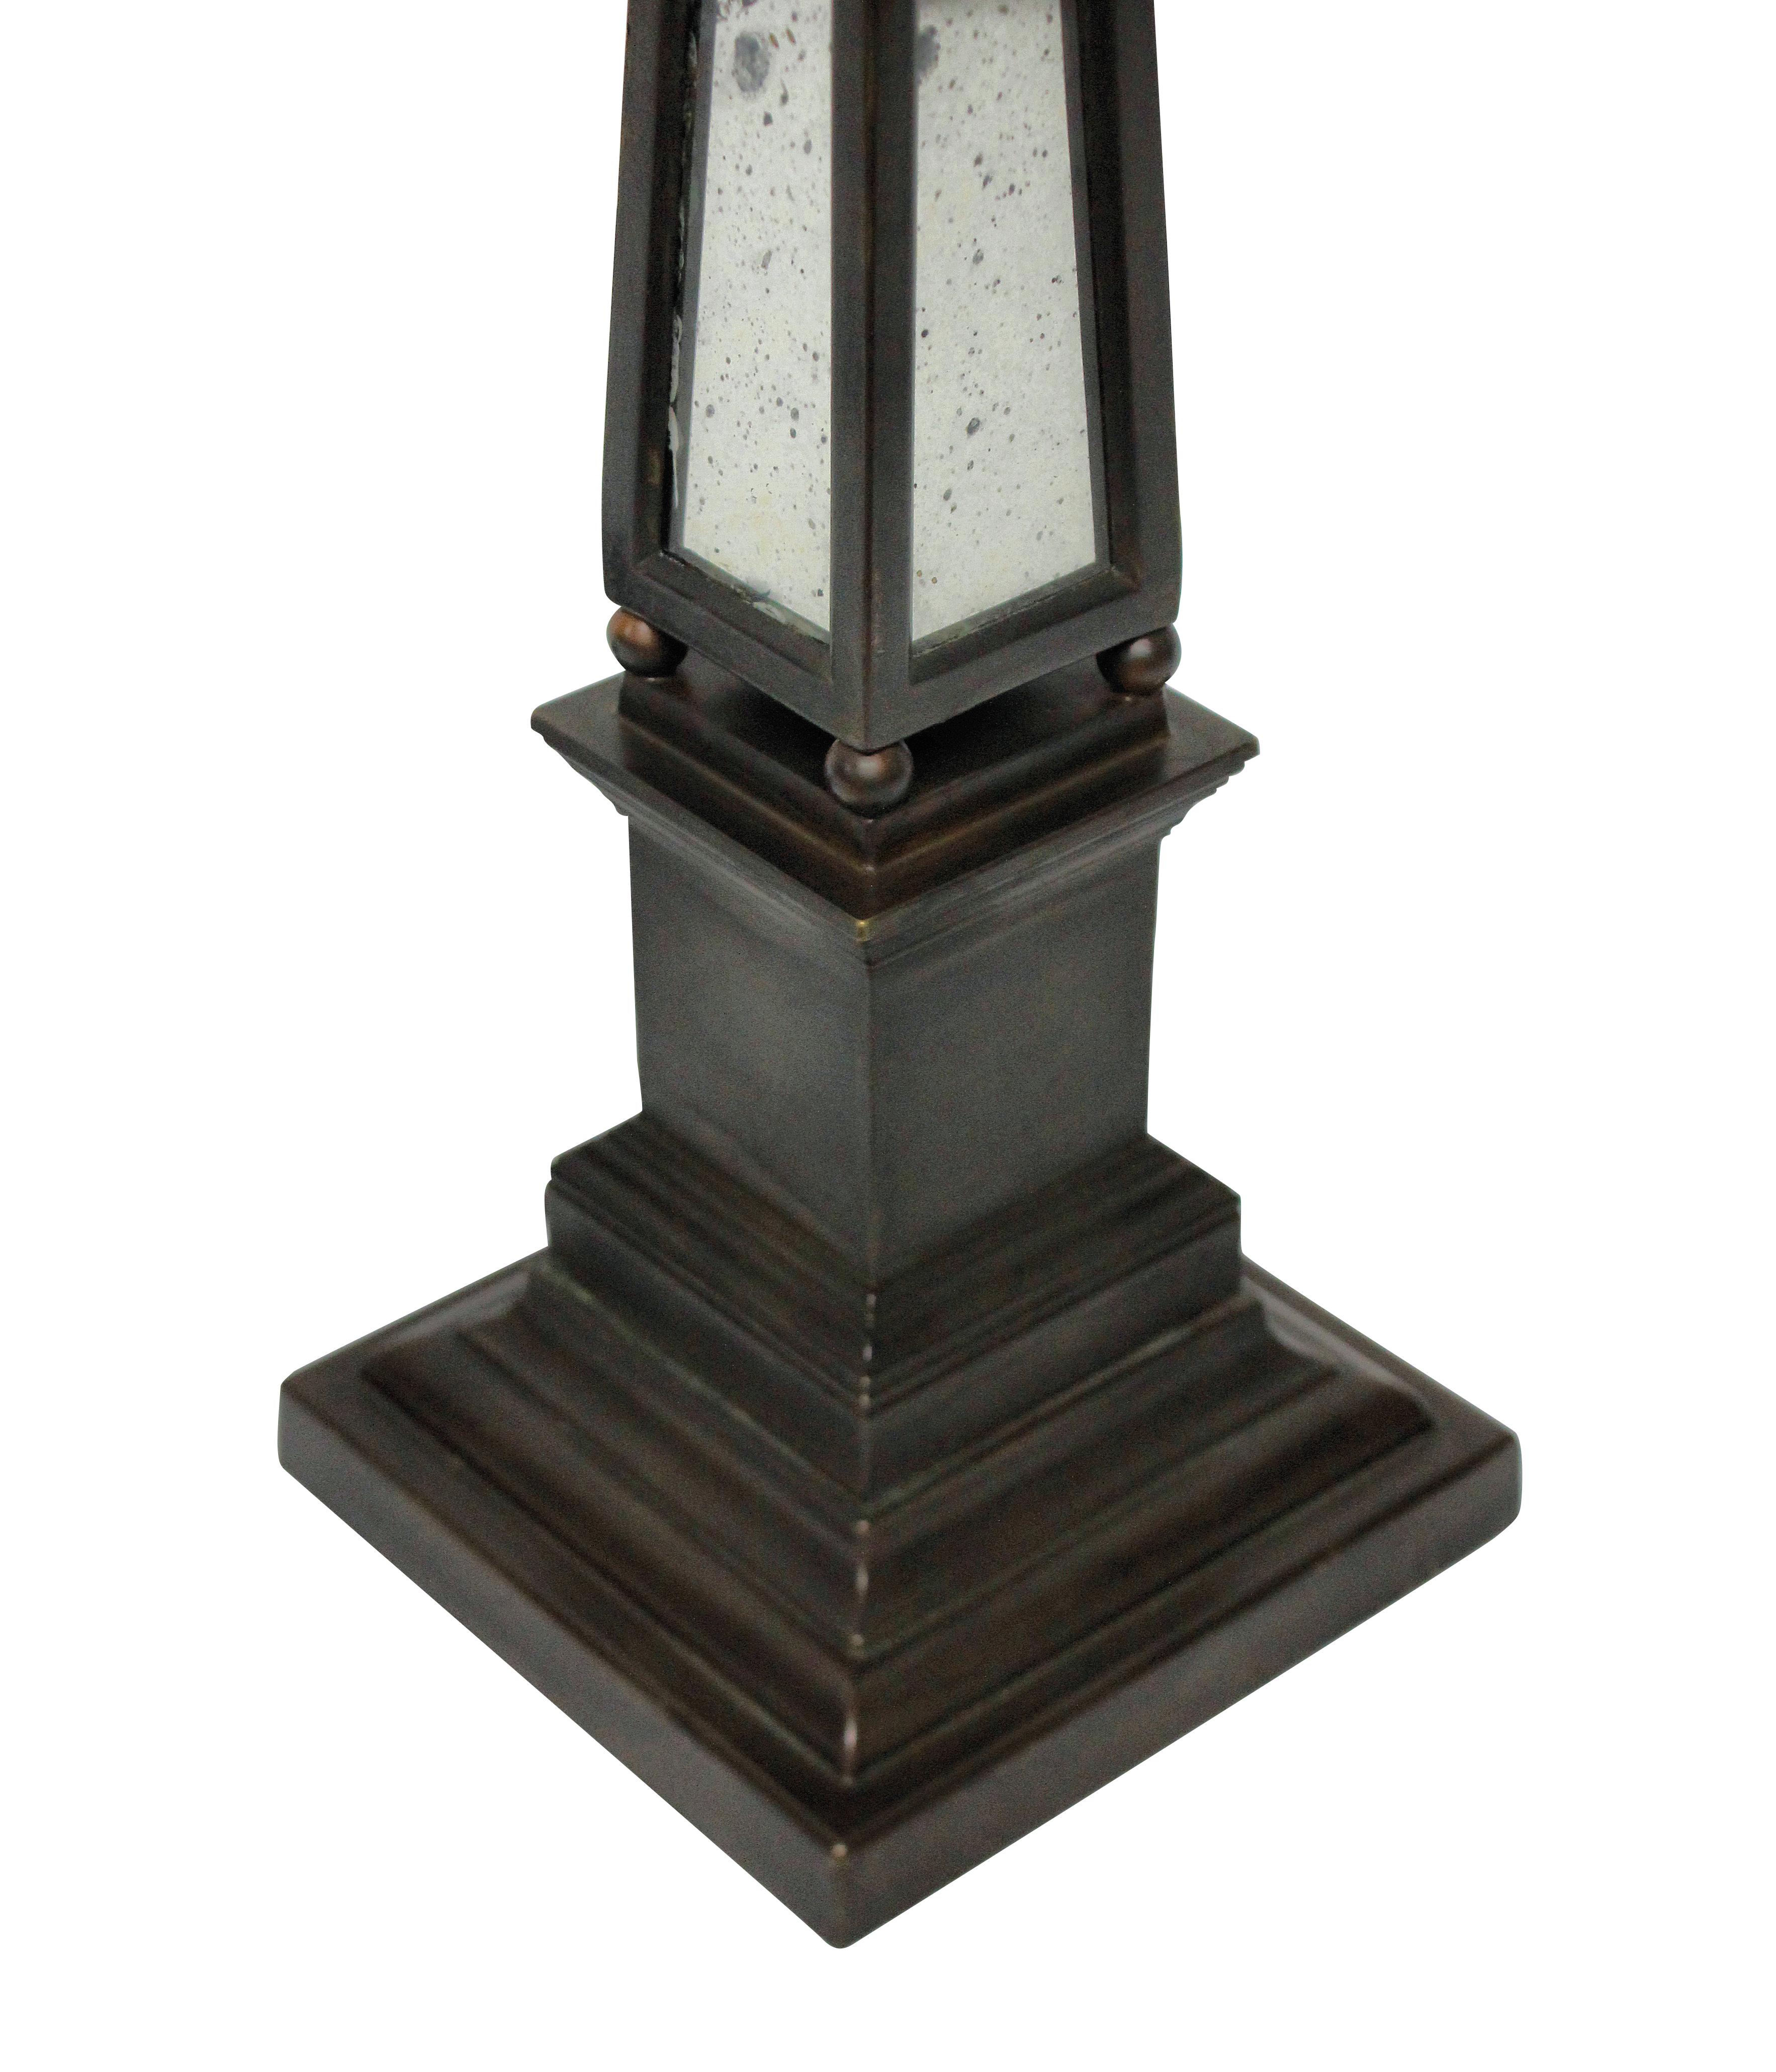 English Pair of Obelisk Lamps with Mirror Panels